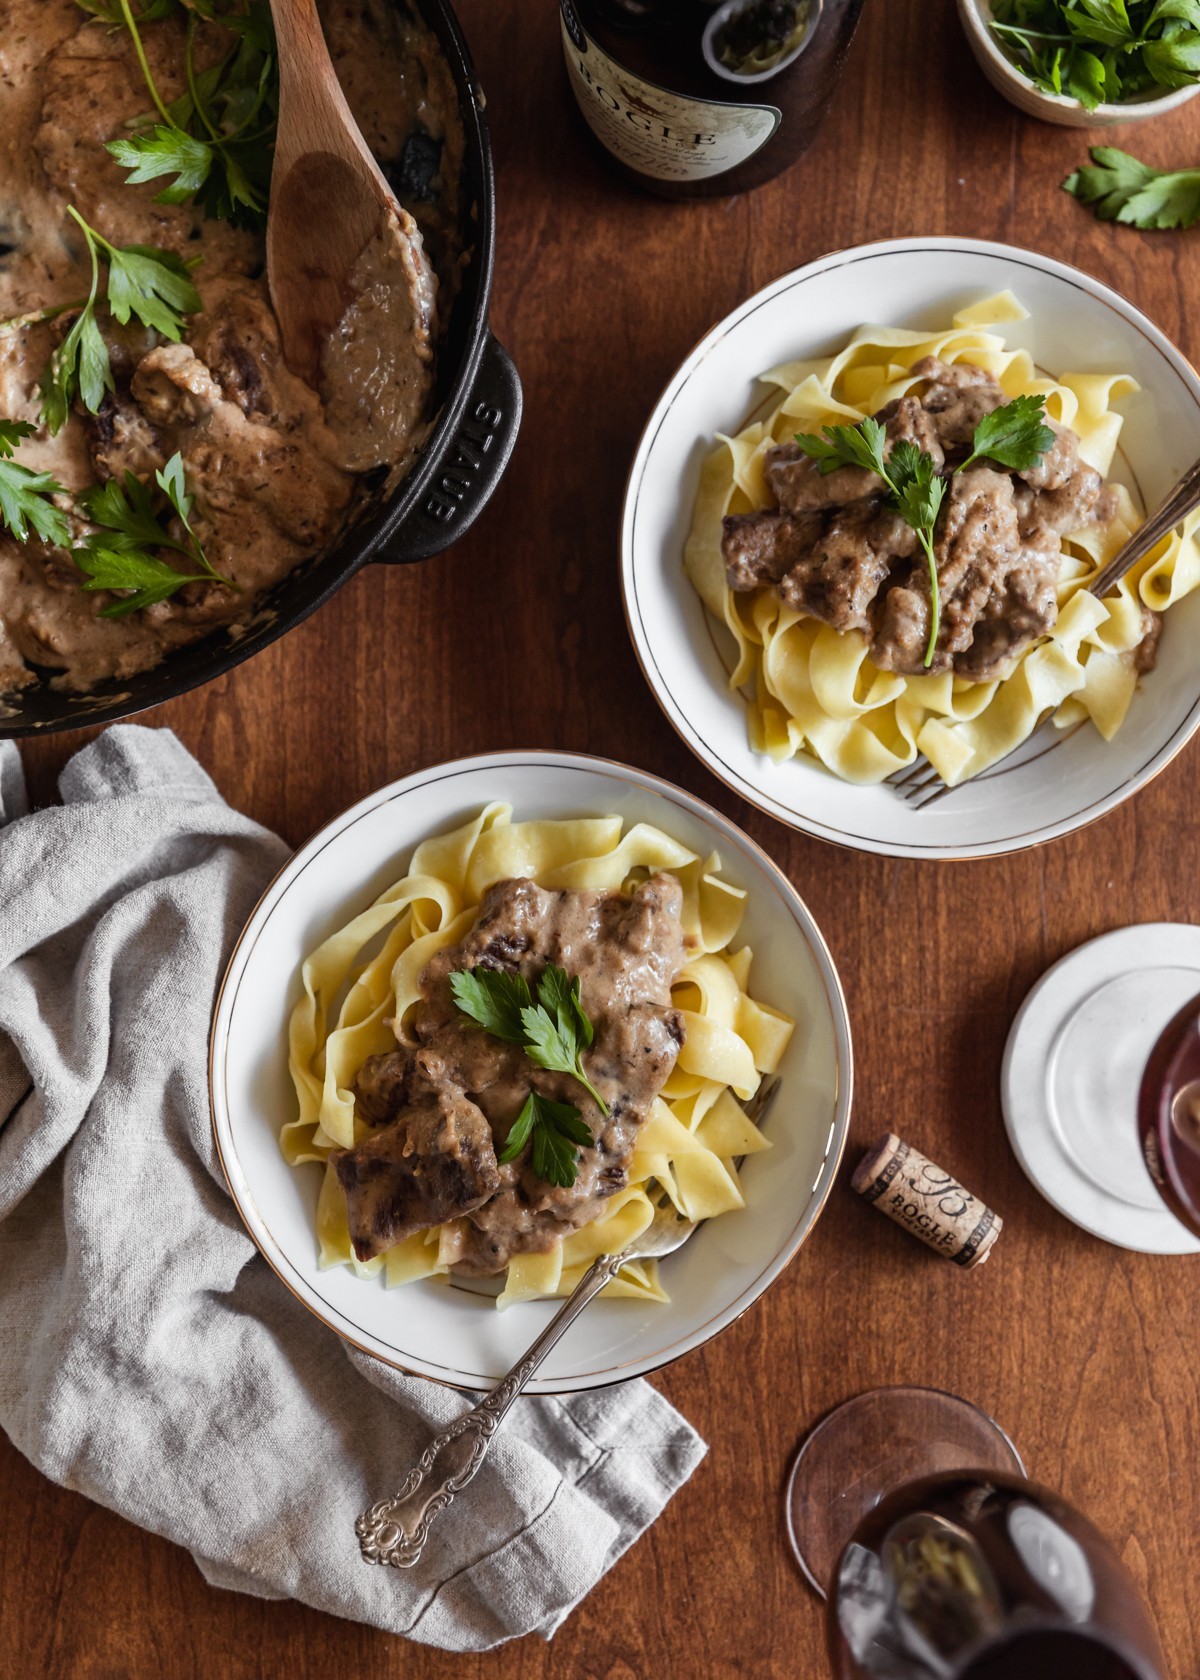 An overhead image of two white bowls of egg noddles topped with beef stroganoff with shallots and brandy on a wood table. In the upper left corner is a skillet with more stroganoff. Next to the bowls is a couple glasses of wine, a beige linen, a cork, and a white bowl of parsley.